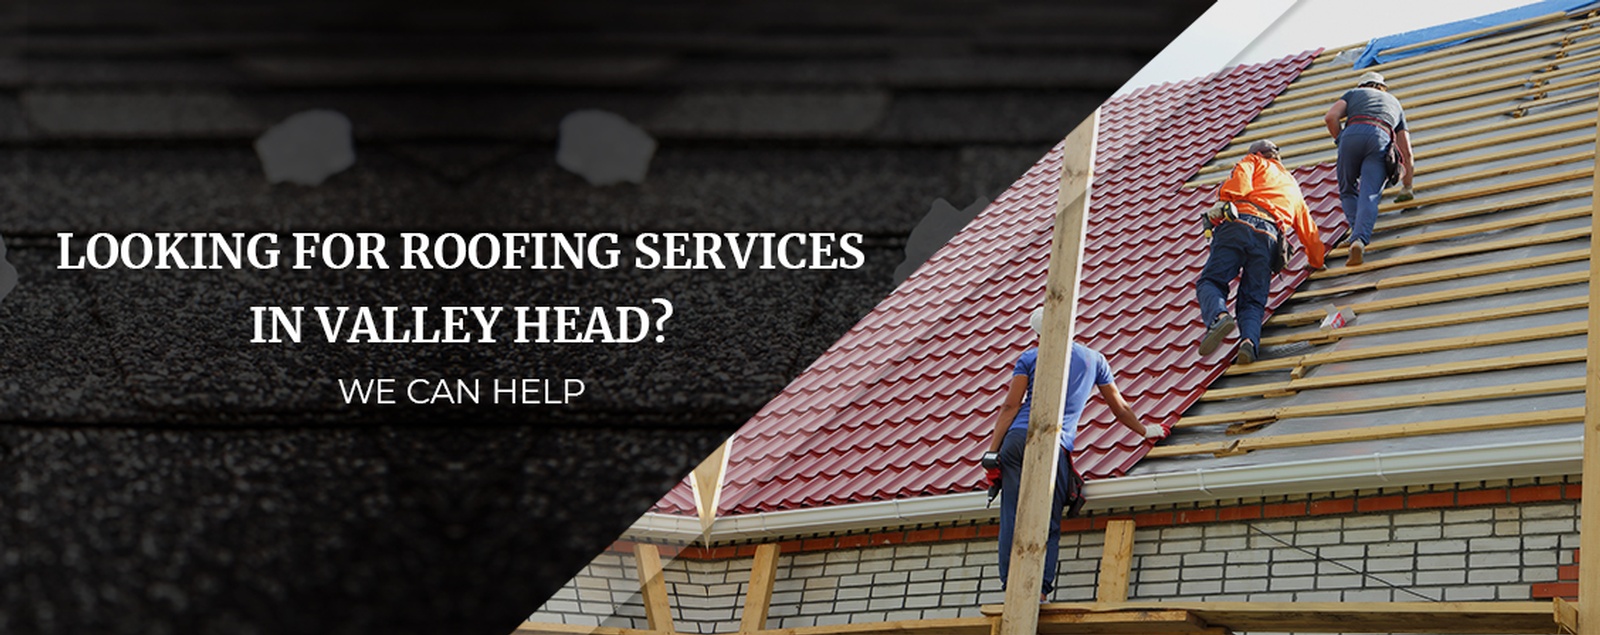 Looking For Roofing Services In Valley Head We Can Help